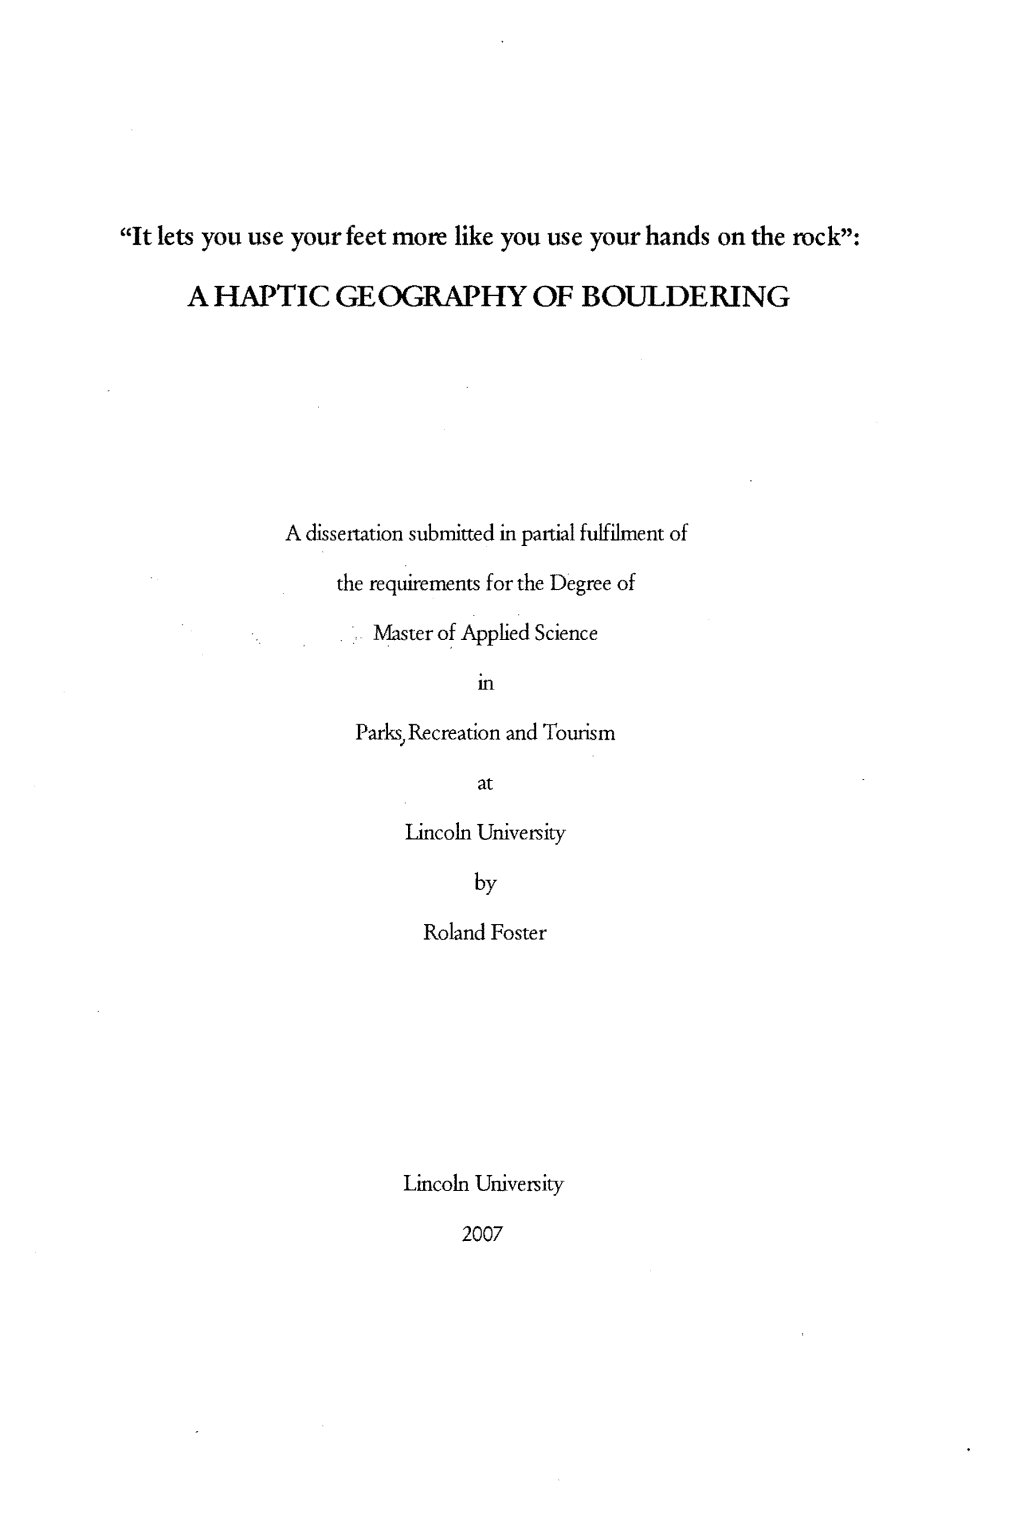 A Haptic Geography of Bouldering